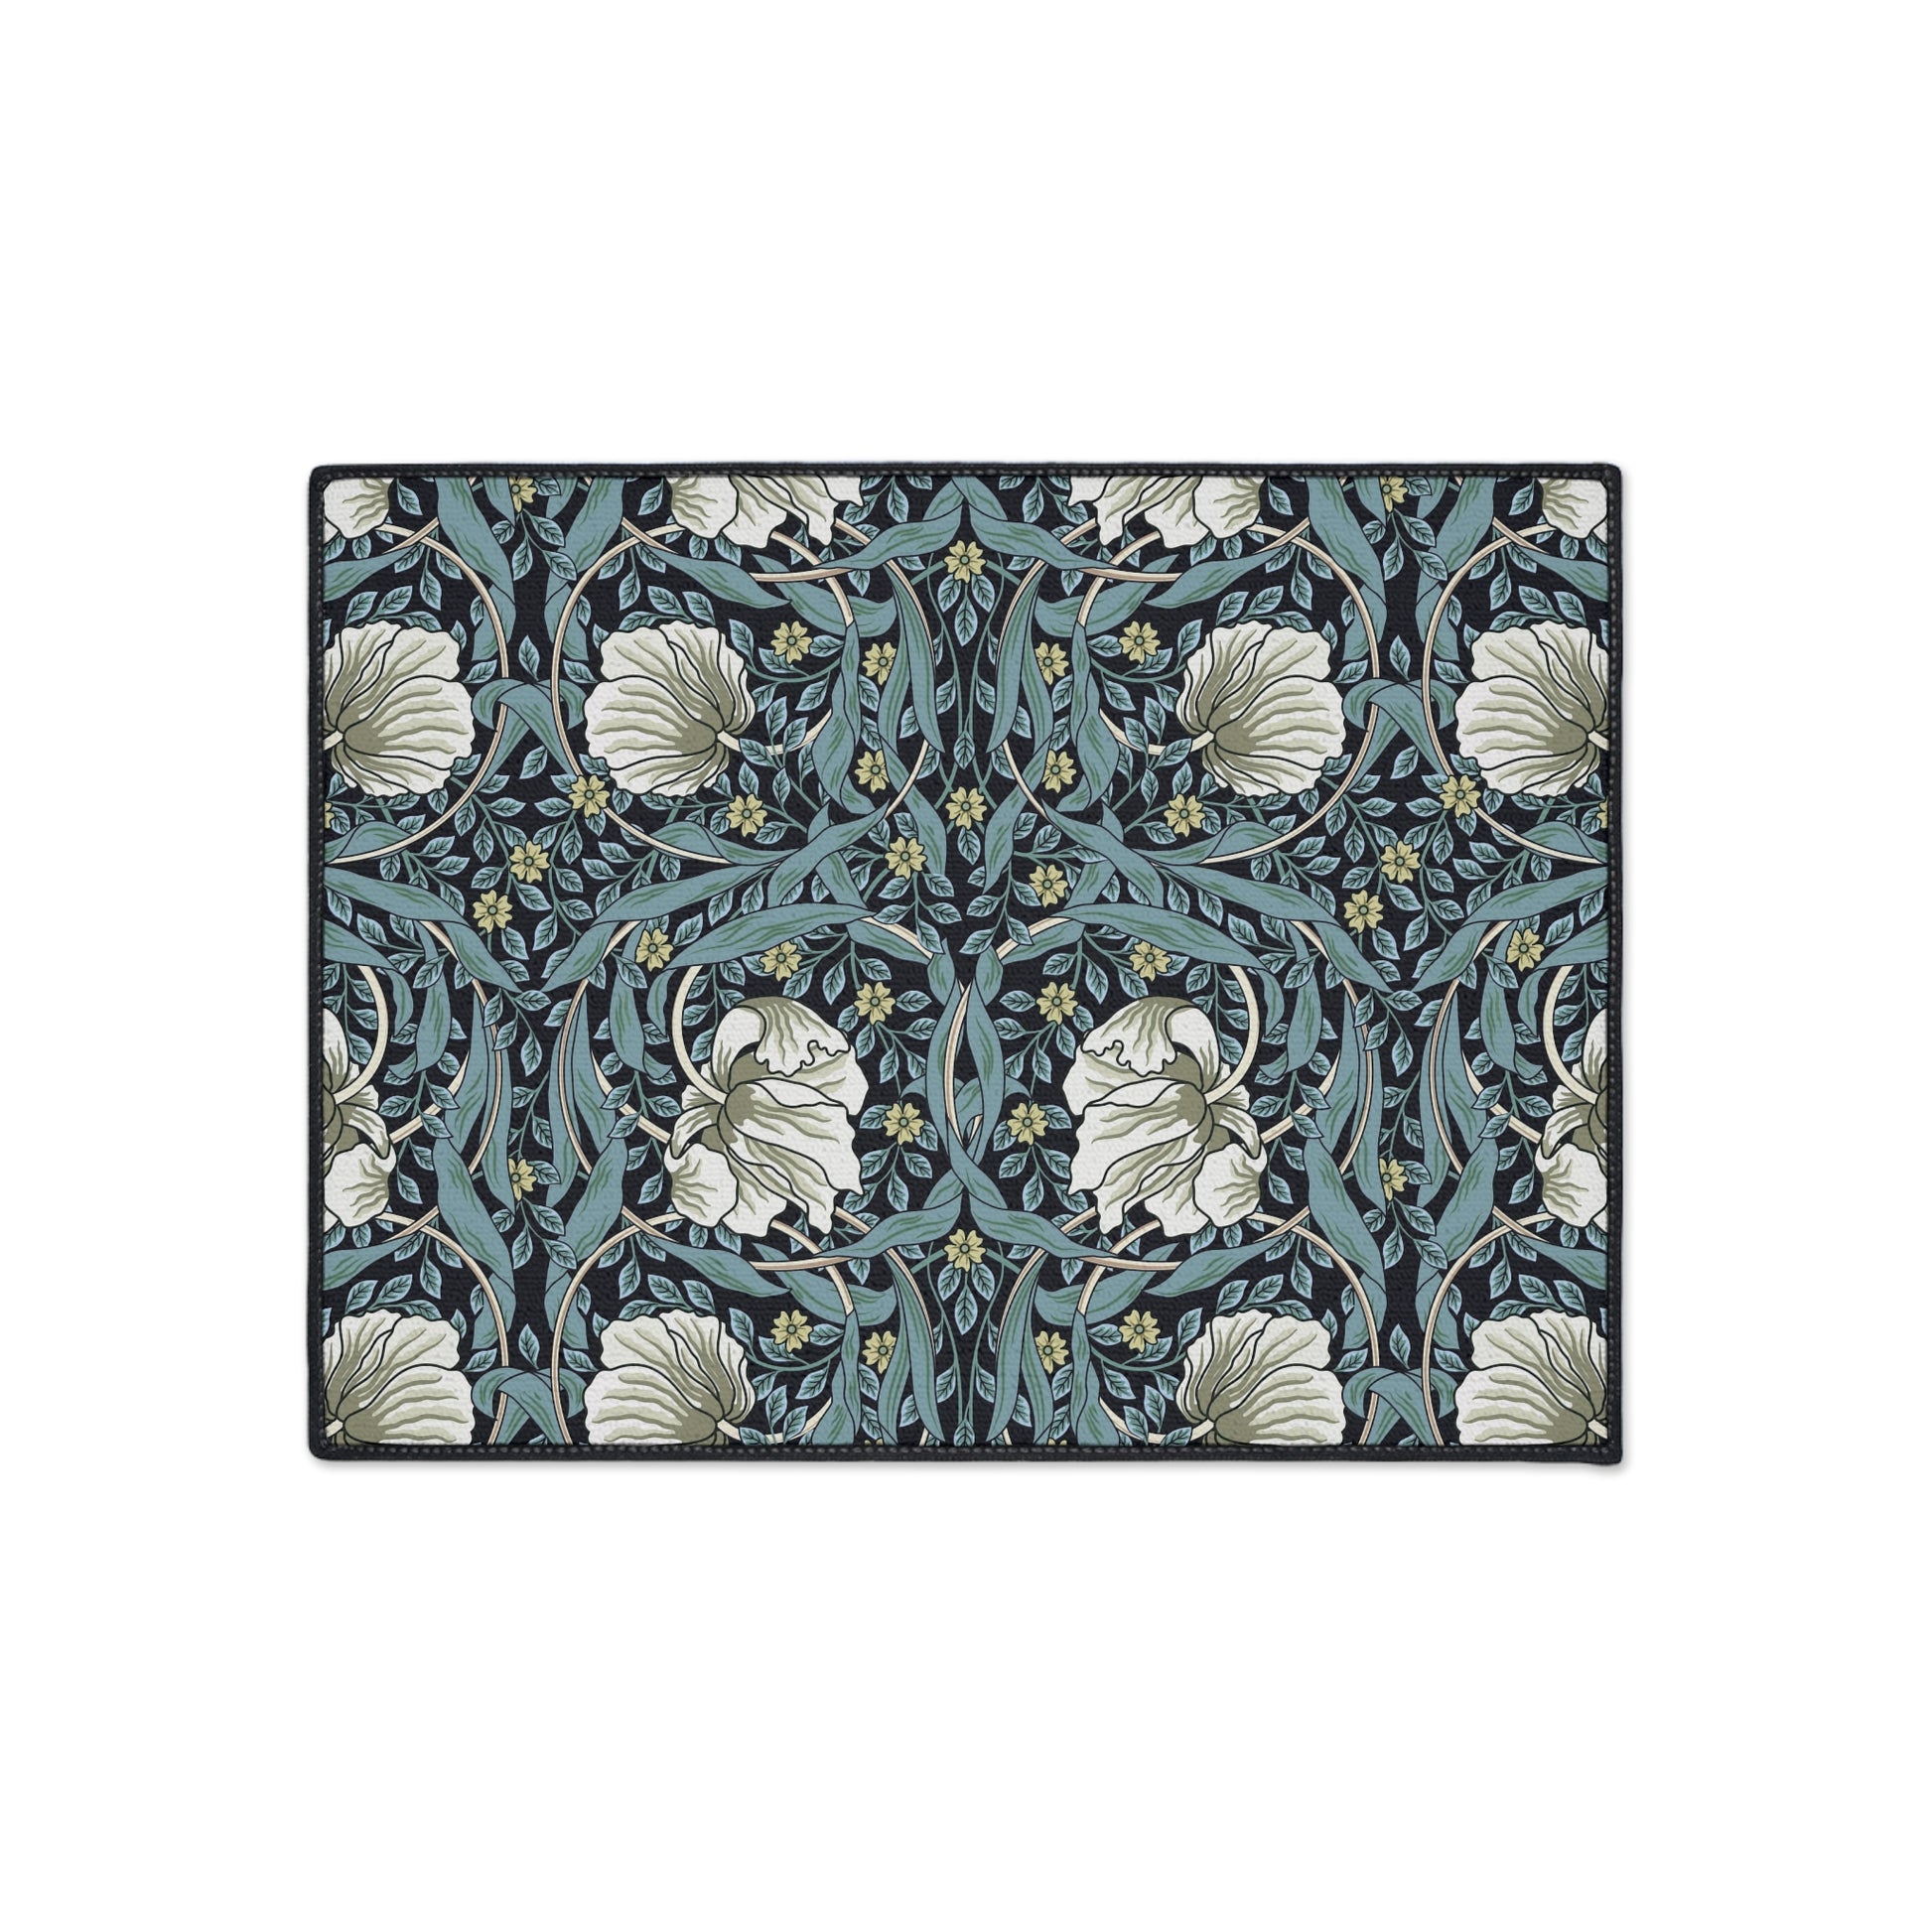 william-morris-co-heavy-duty-floor-mat-pimpernel-collection-slate-5